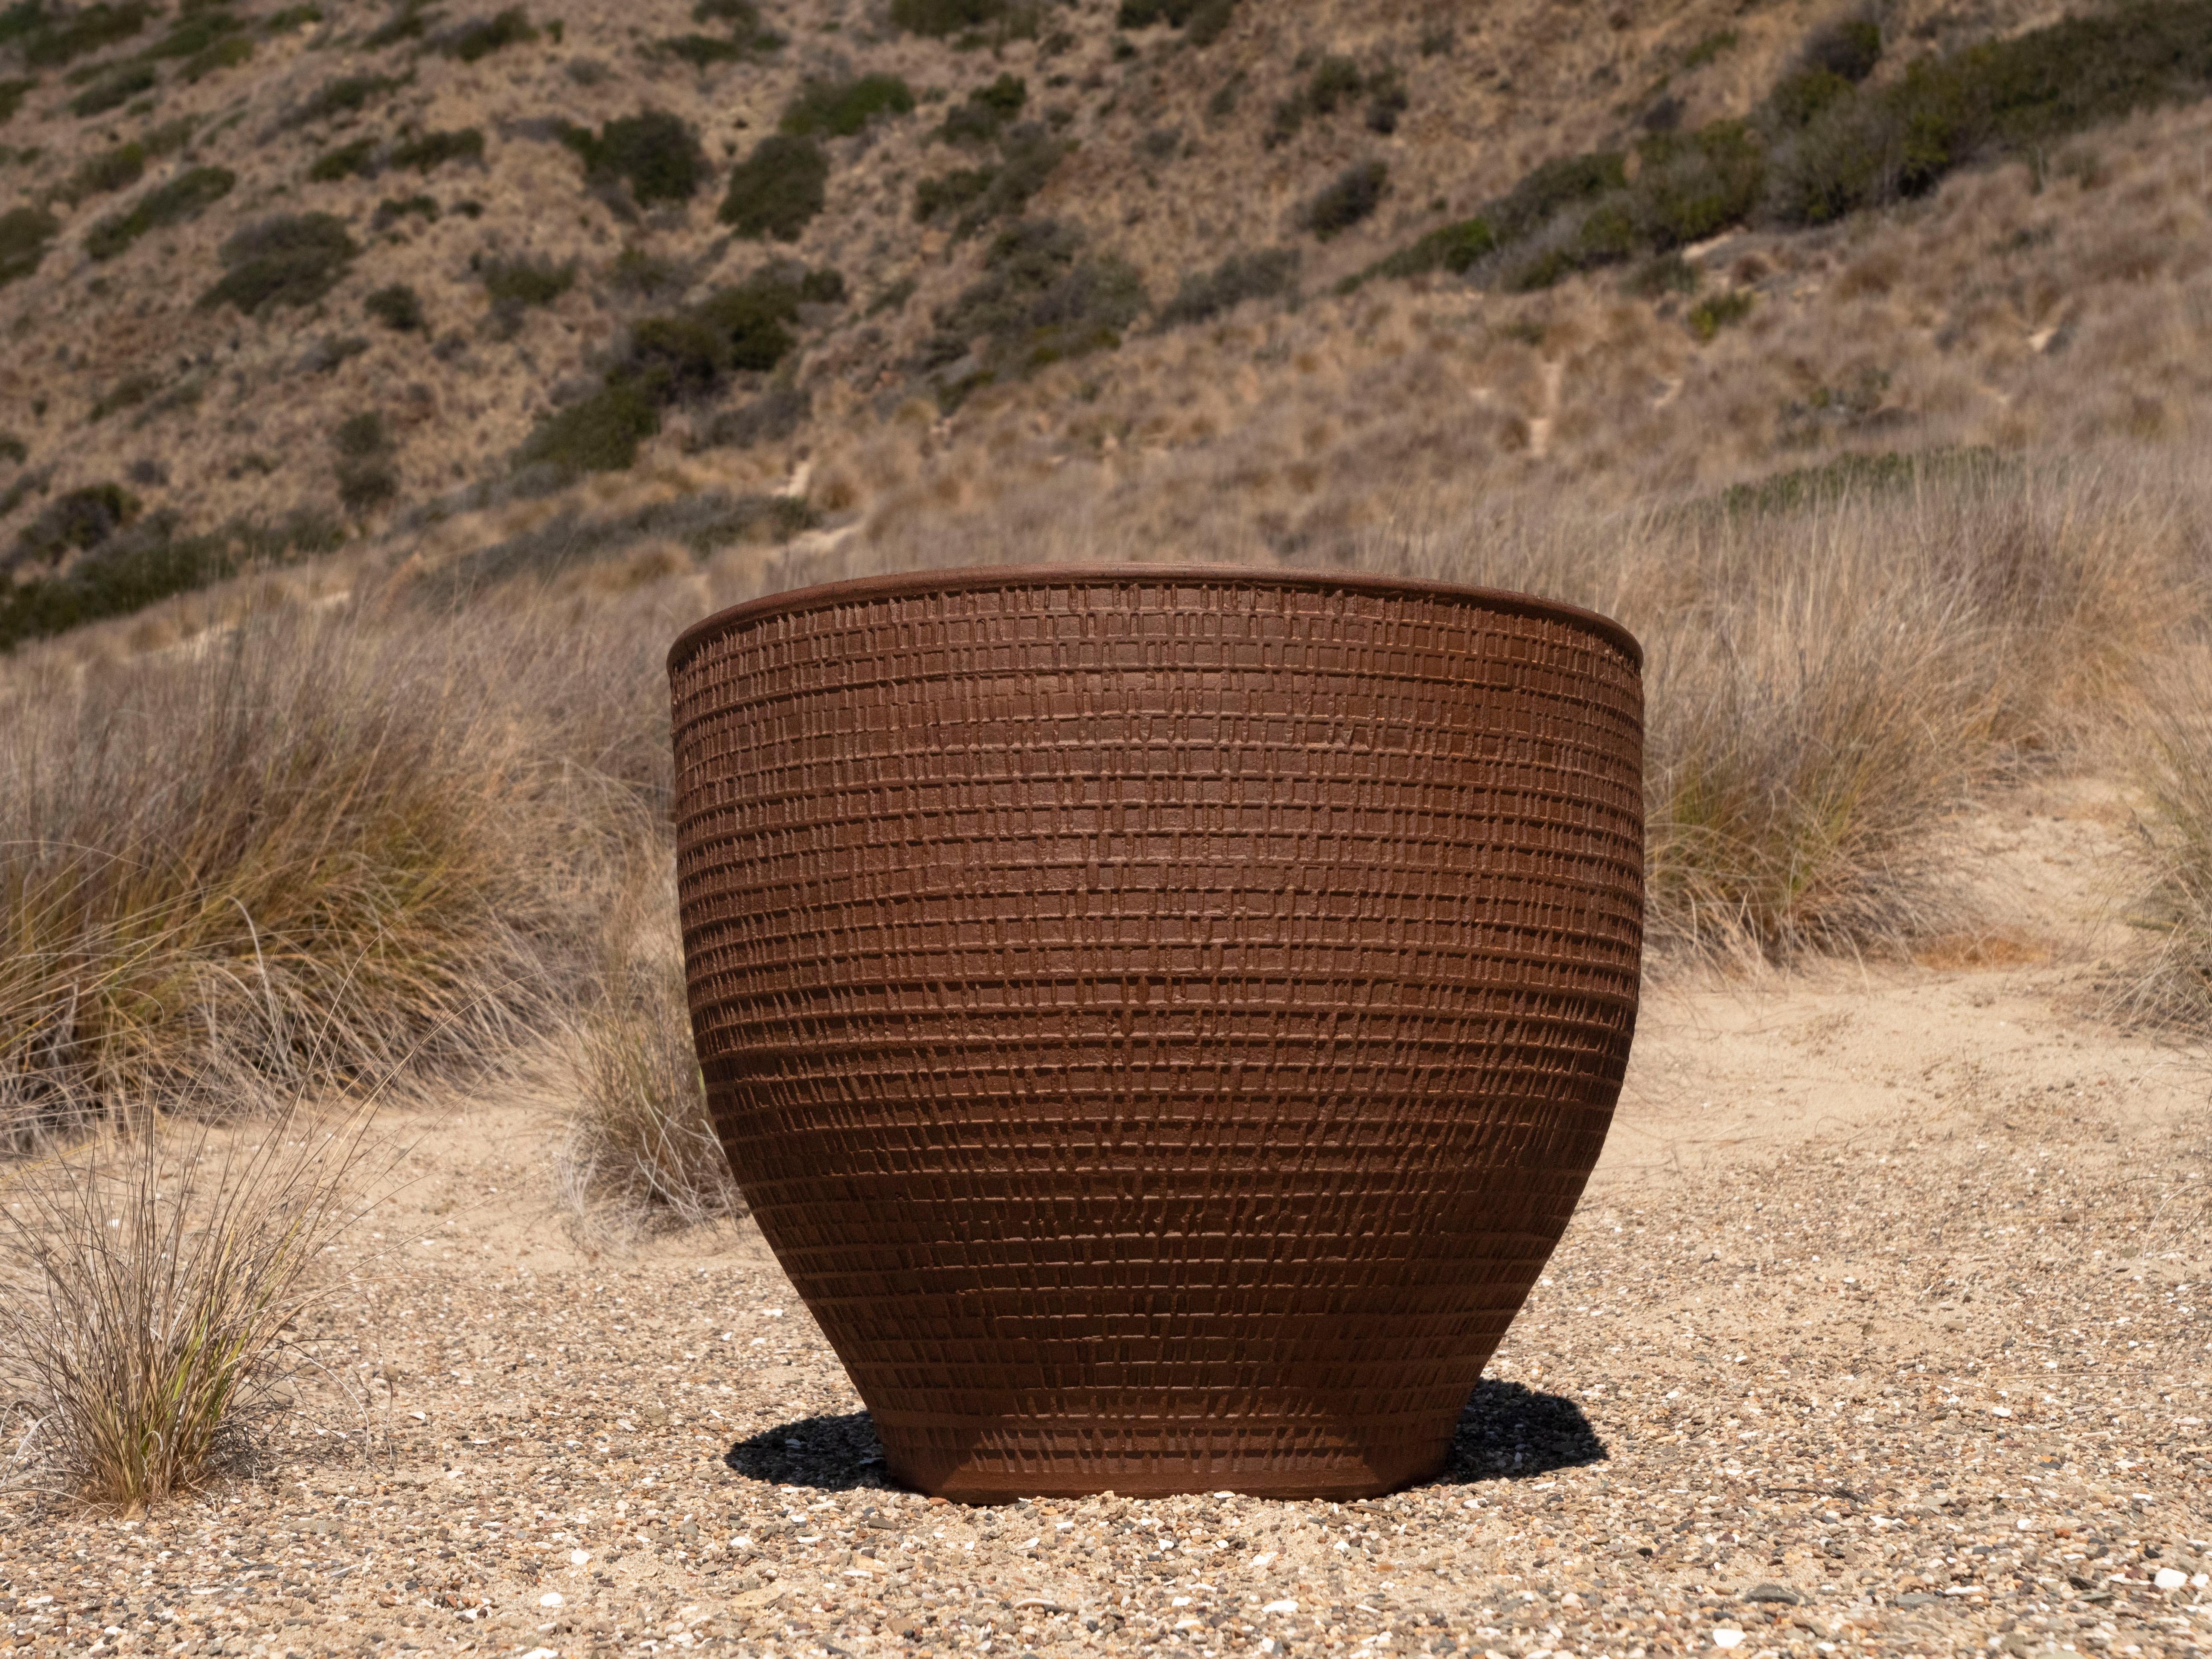 Mid-Century Modern planters for Architectural Pottery's Pro Artisan line, circa 1970's. David Cressey's 